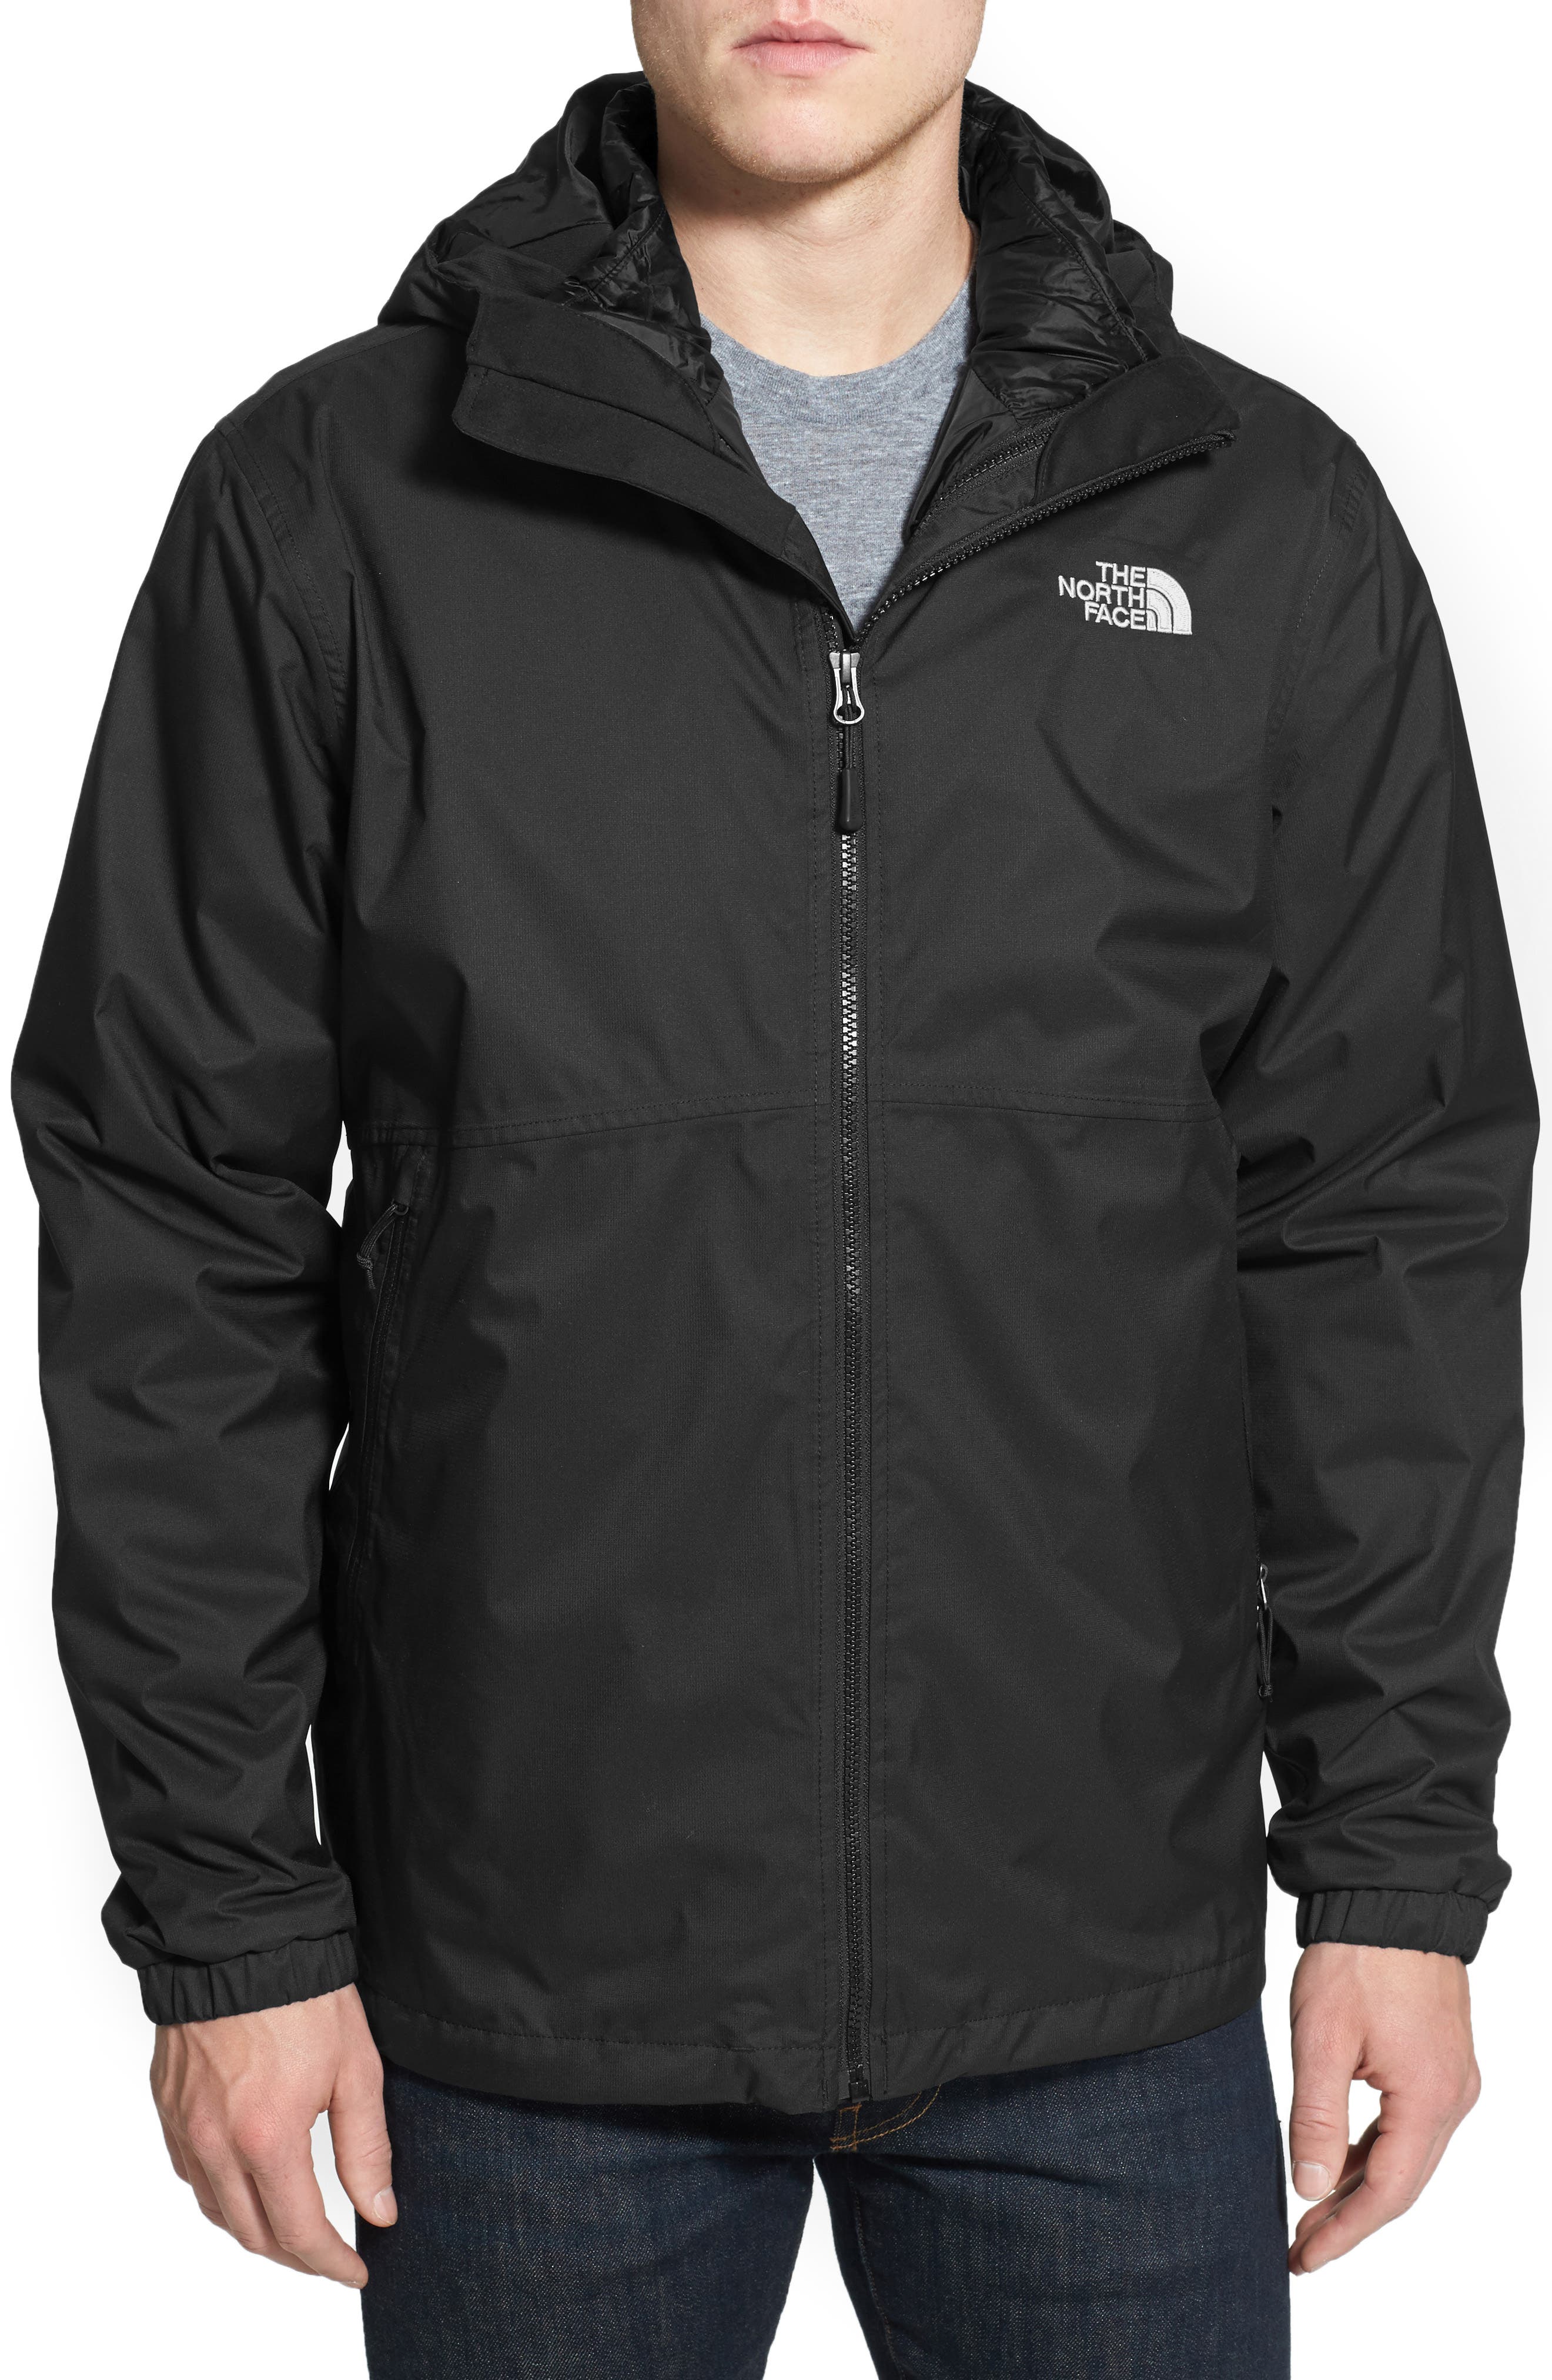 north face hyvent jacket 